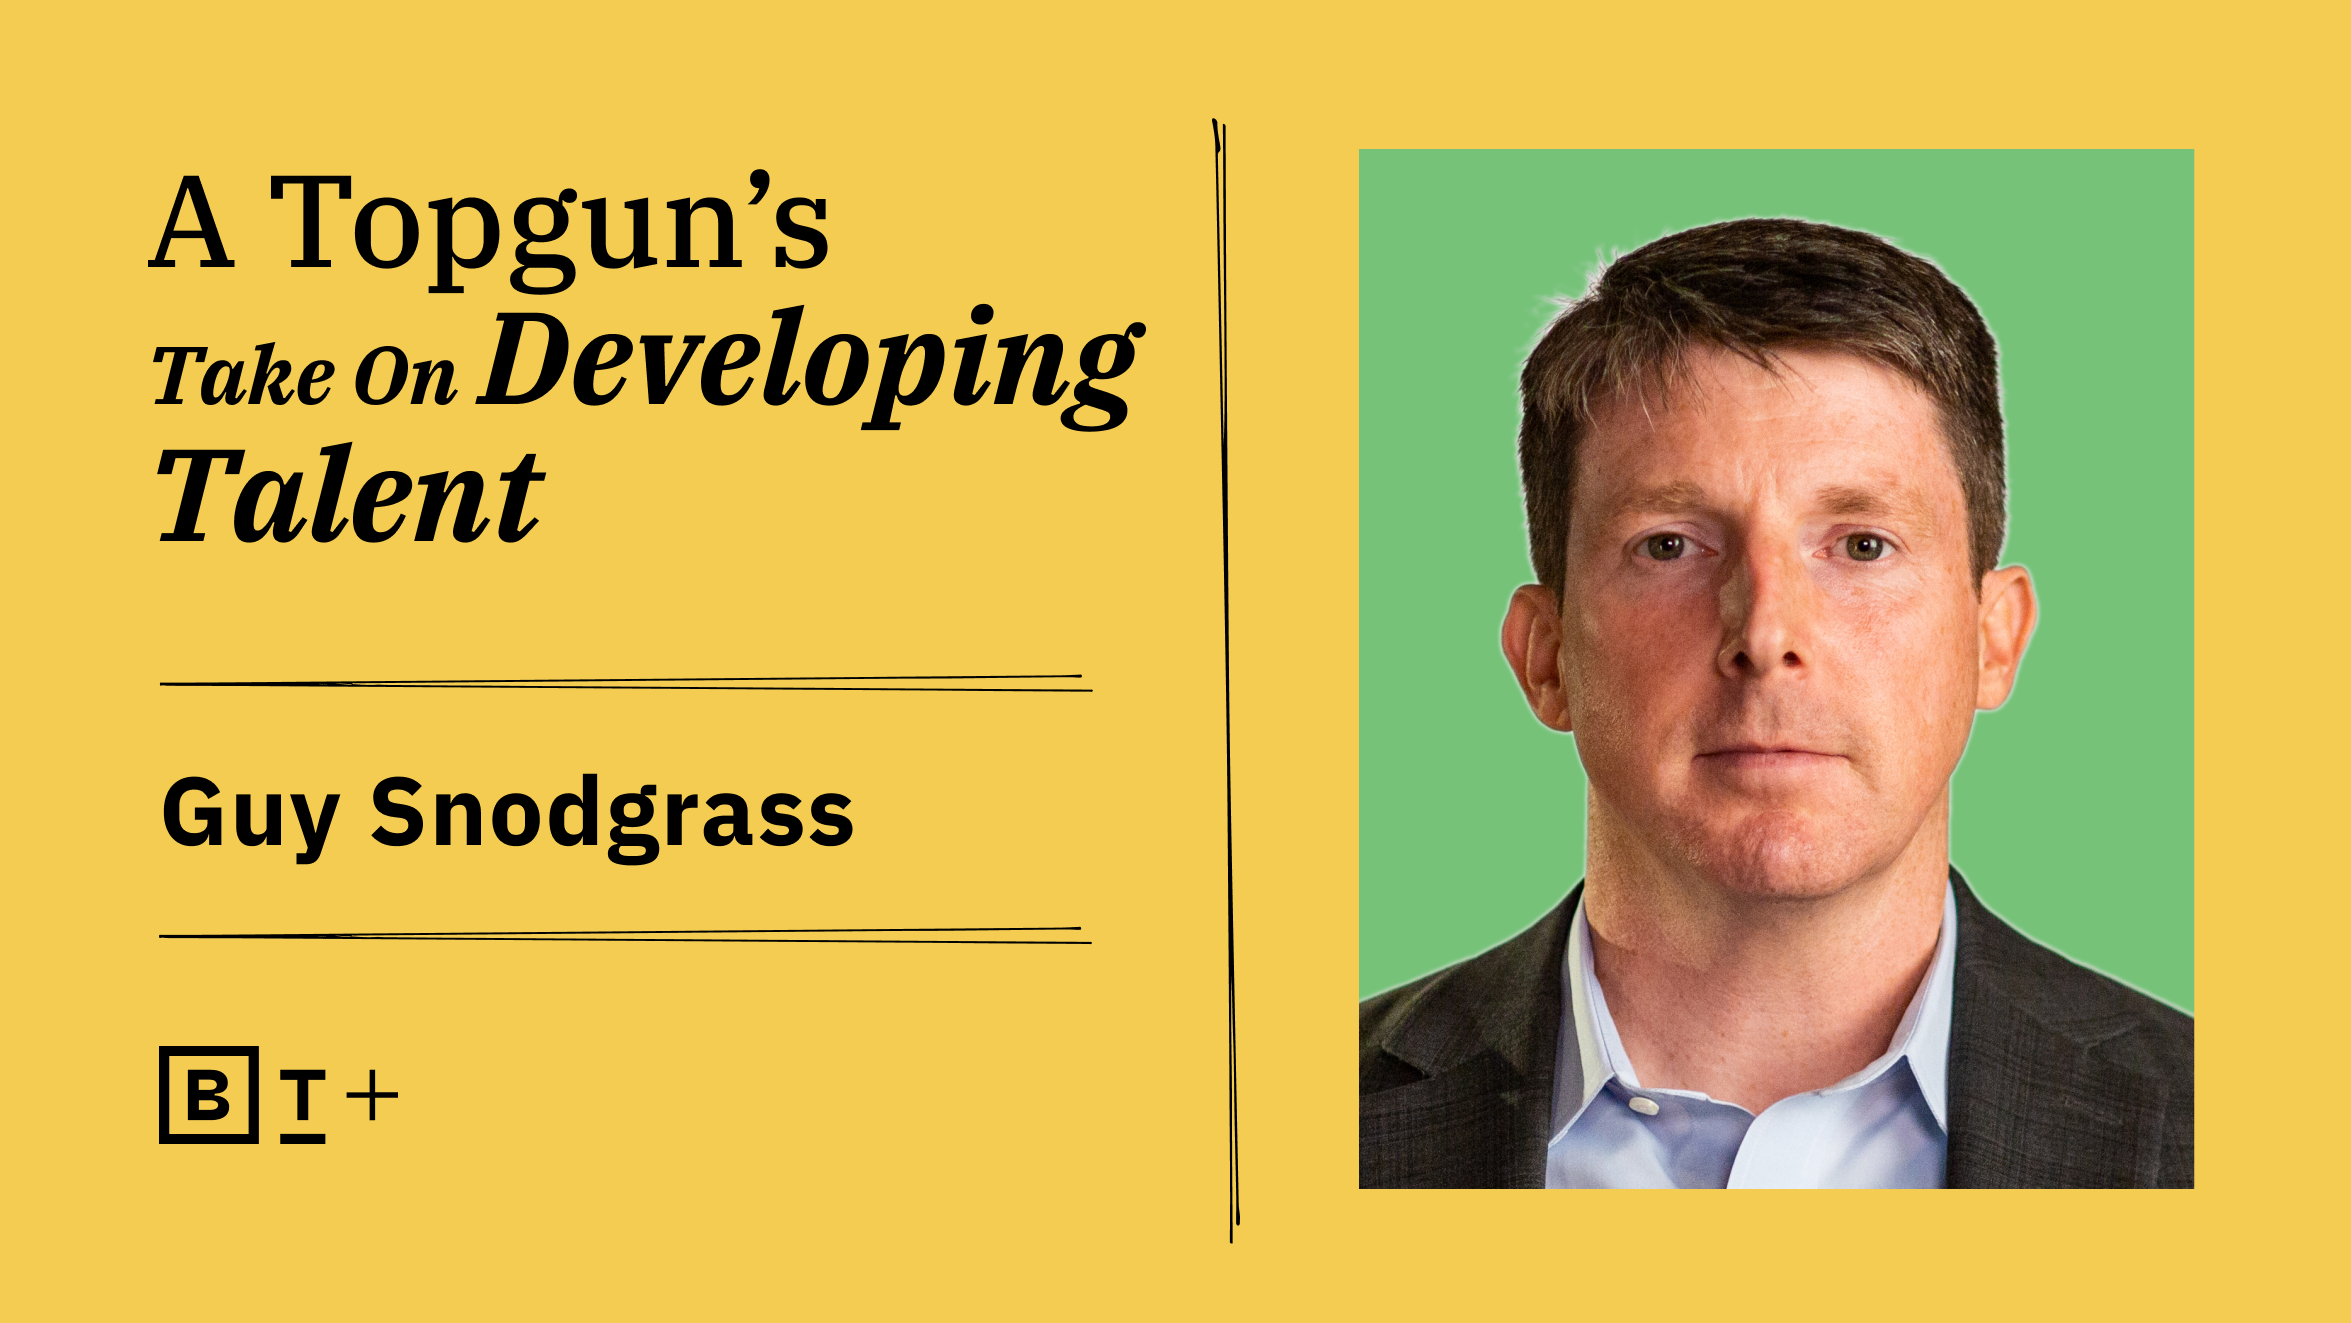 Guy shodgrass's take on developing talent.